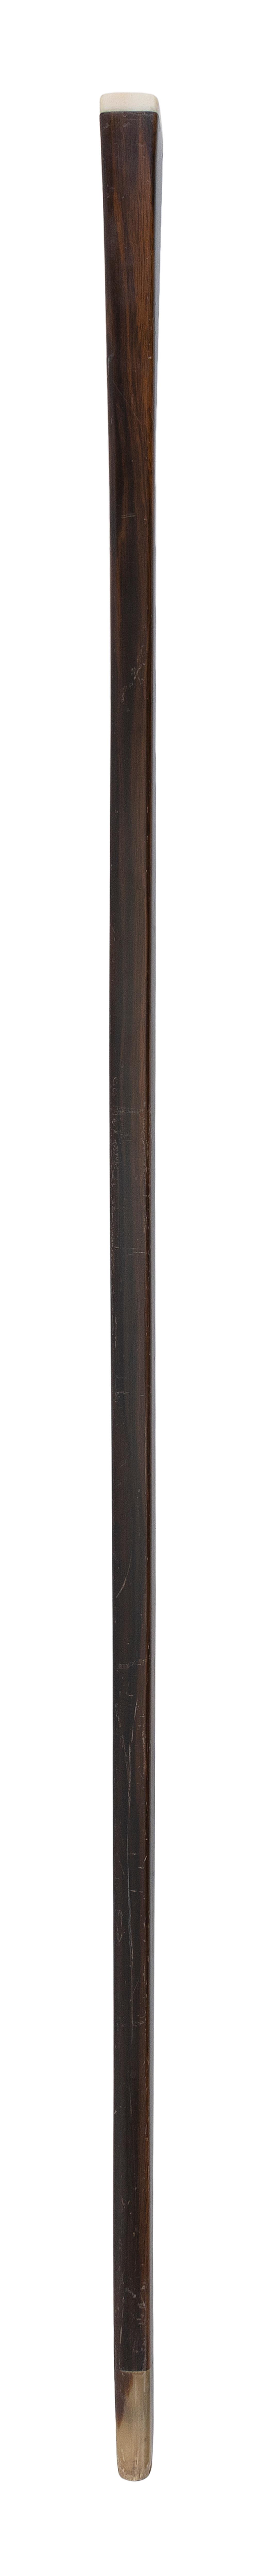 ENGLISH ROSEWOOD CANE WITH WHALE